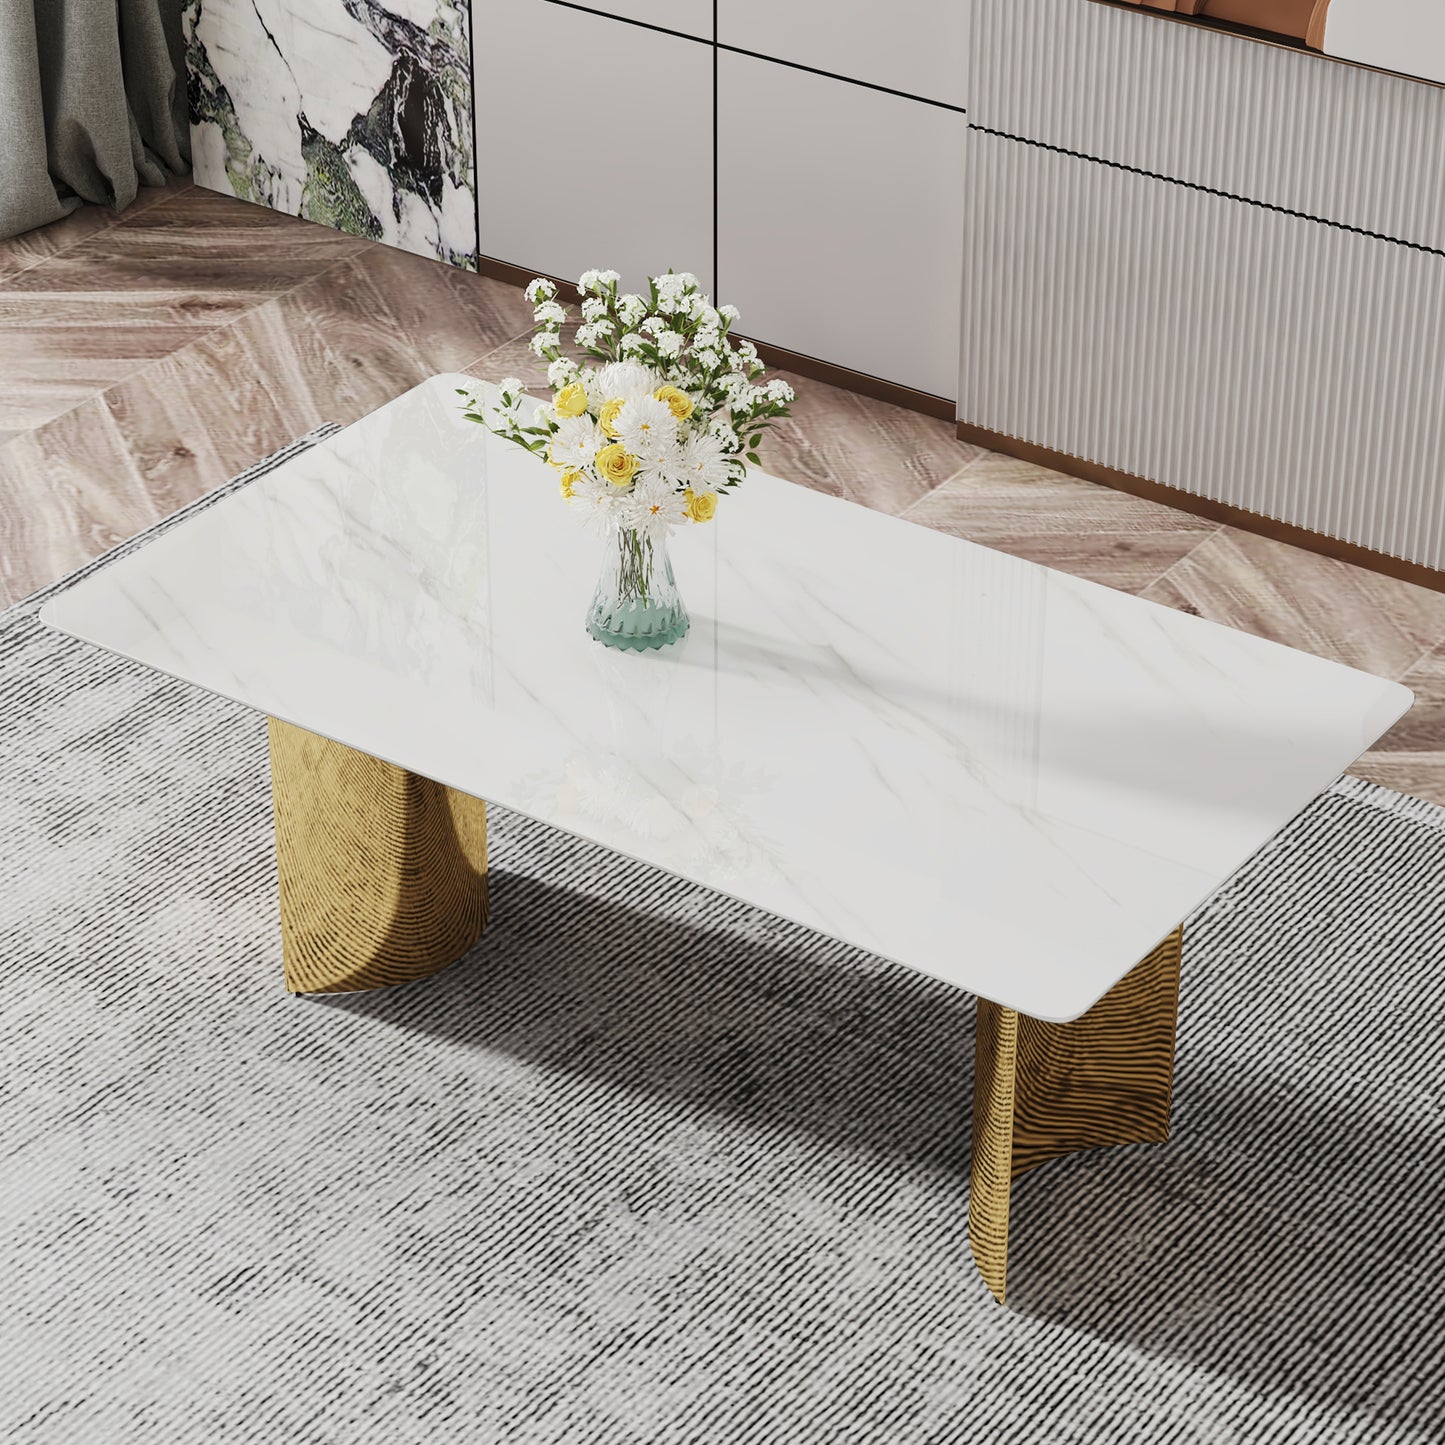 zara marble dining table, gold